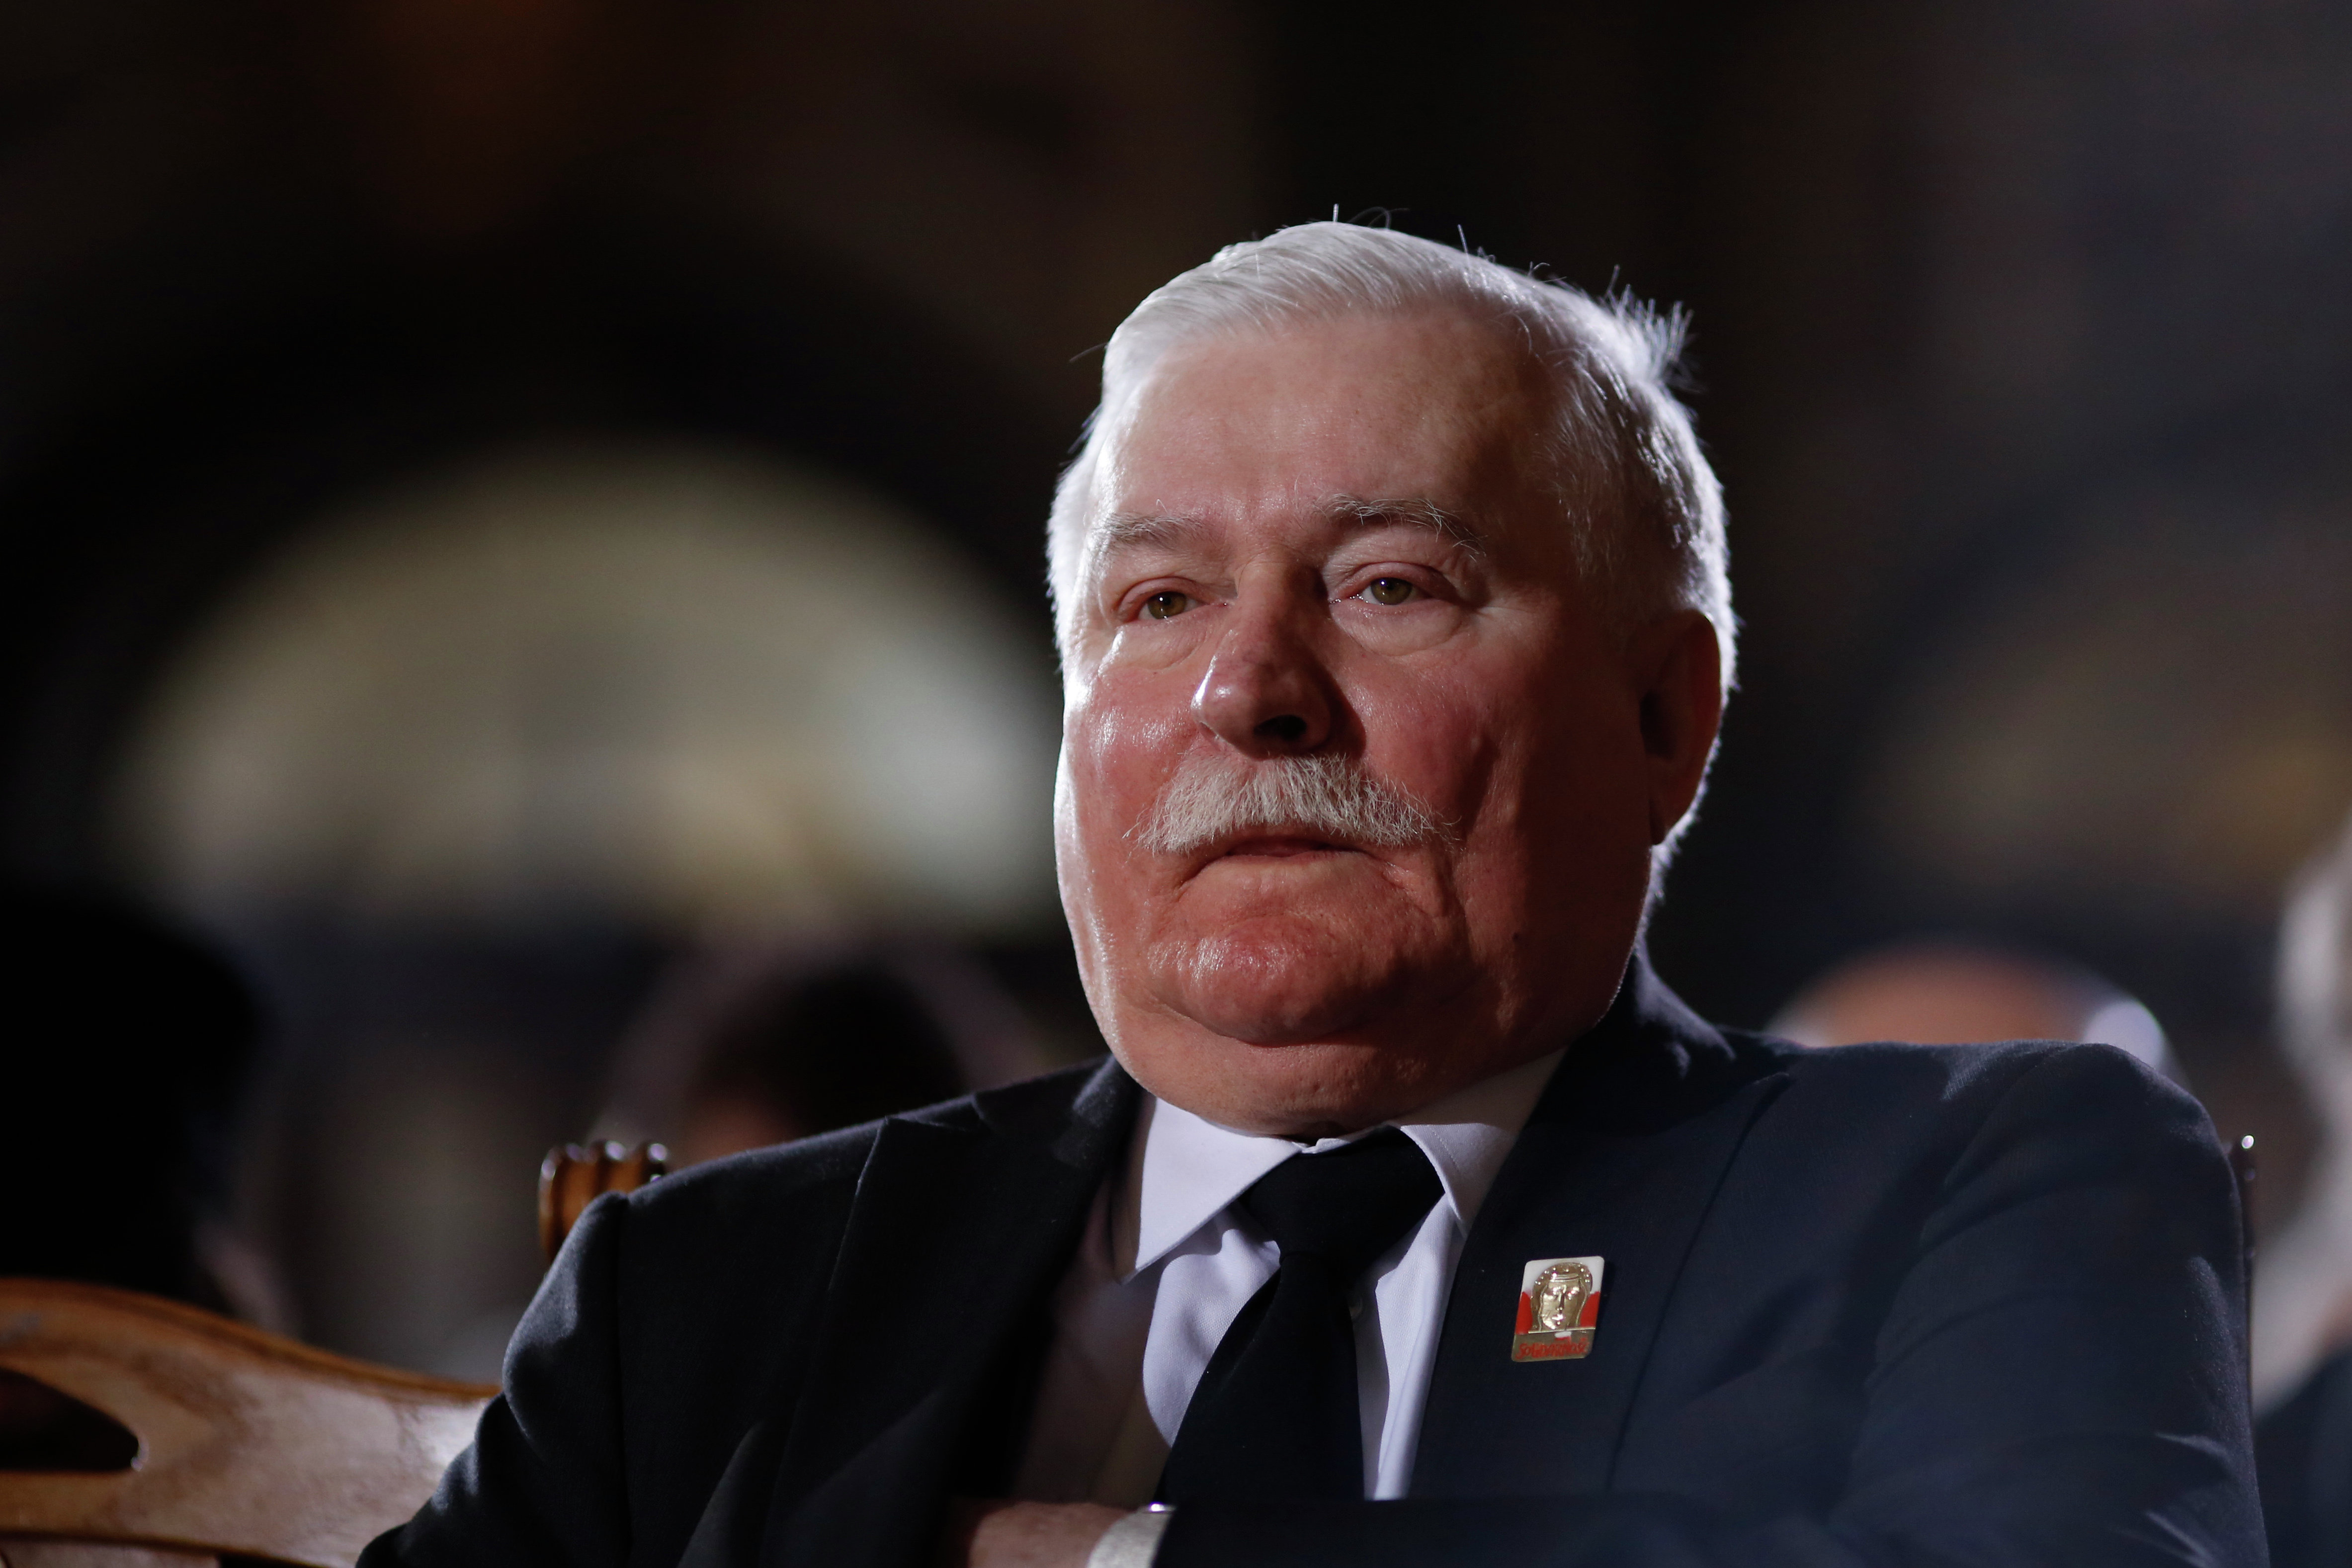 Former Polish President Lech Walesa attends the state funeral of the former German President Richard von Weizsaecker at Berlin Cathedral, the protestant church of Berlin on February 11, 2015